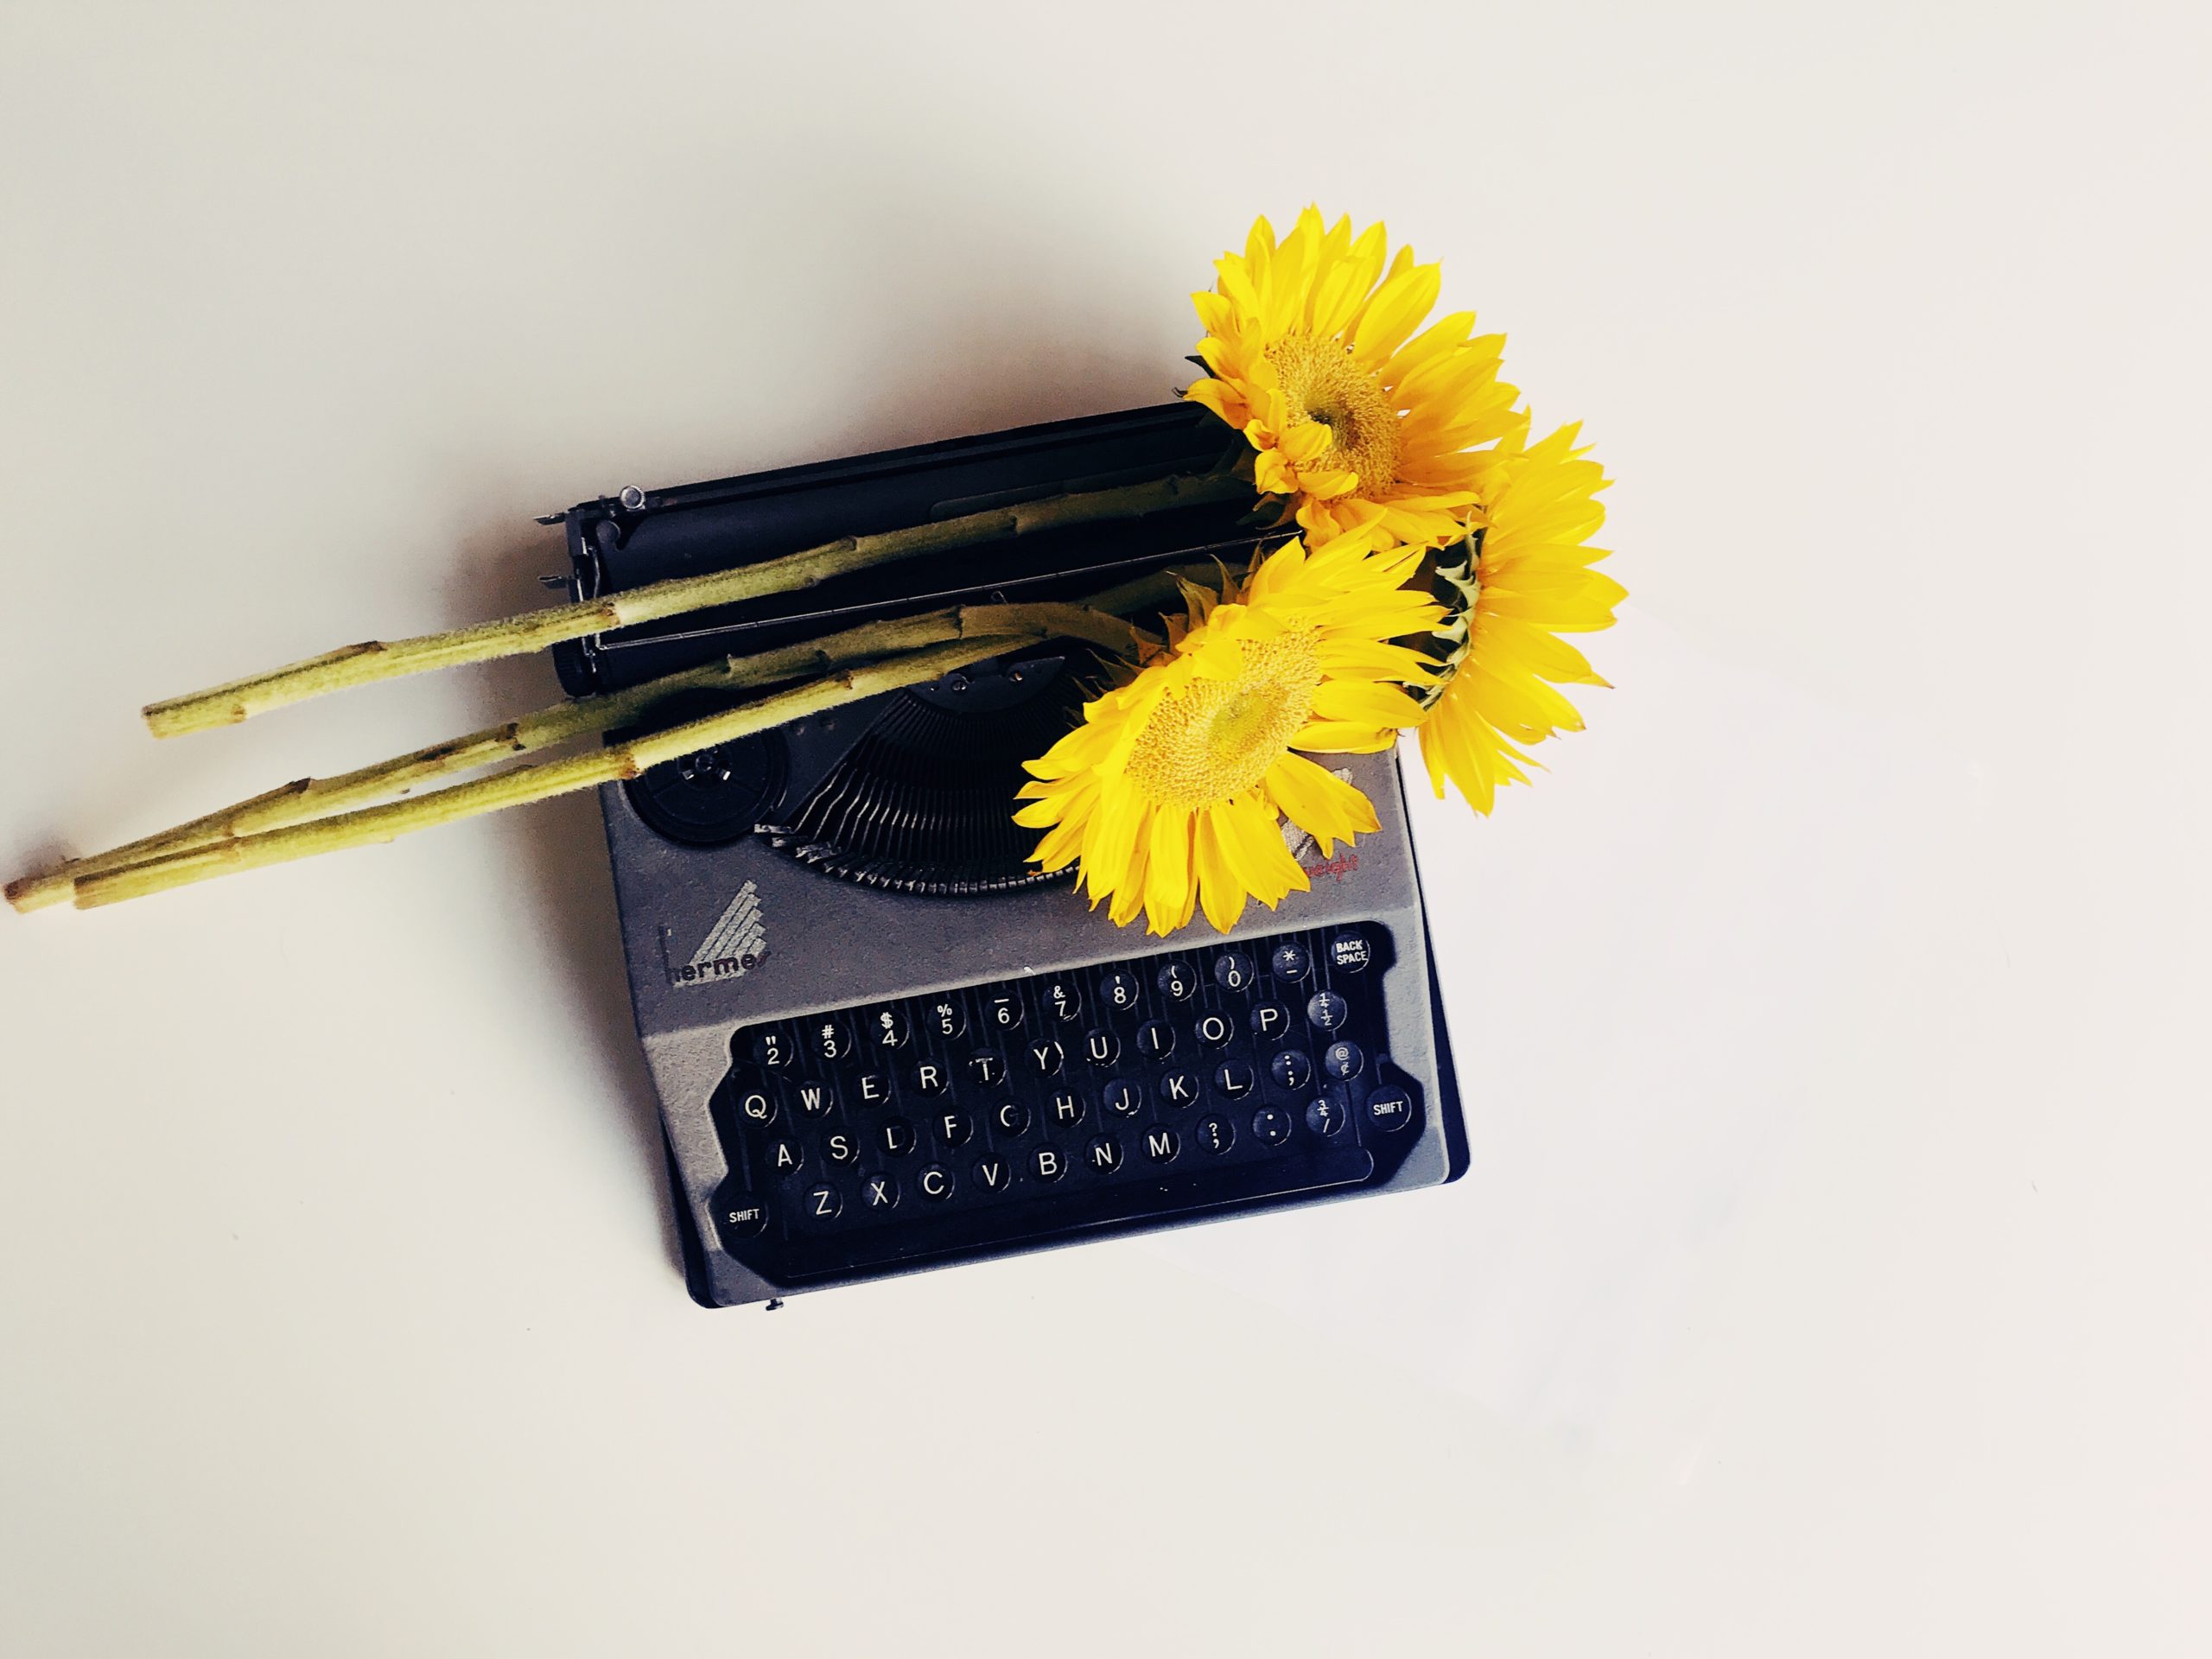 A black typewriter with yellow sunflowers set on top of it, all on a plain taupe background